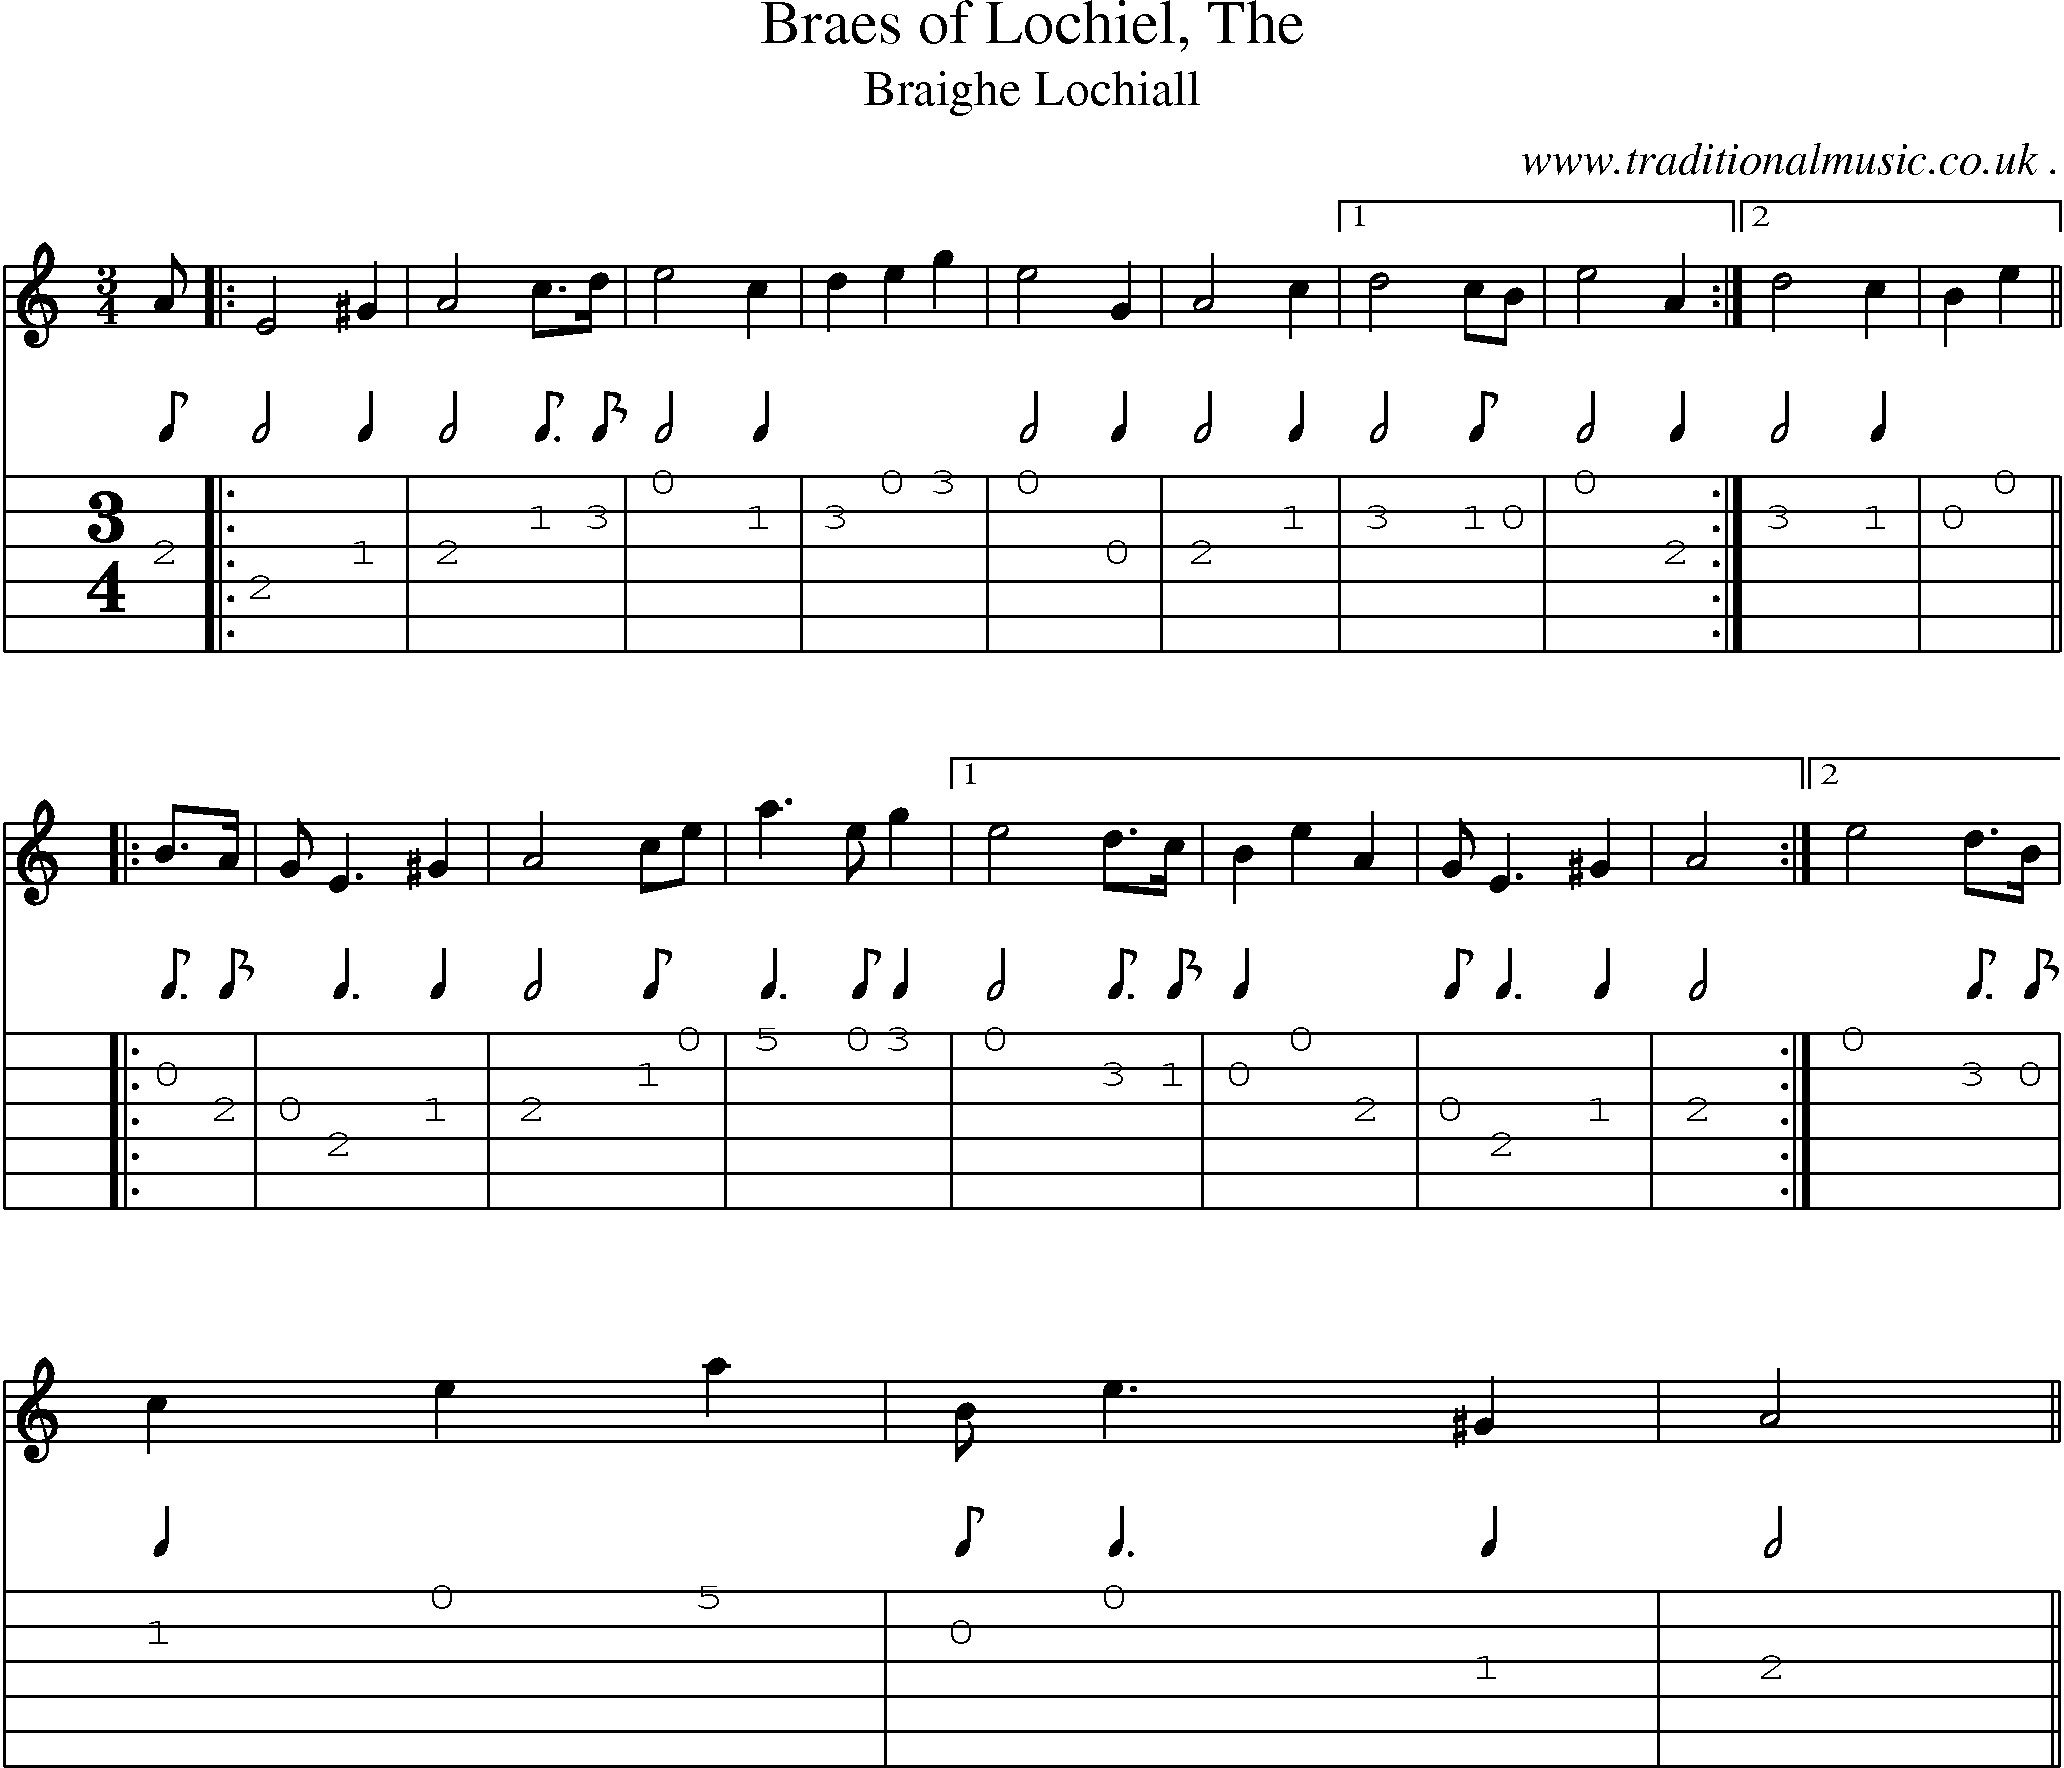 Sheet-music  score, Chords and Guitar Tabs for Braes Of Lochiel The